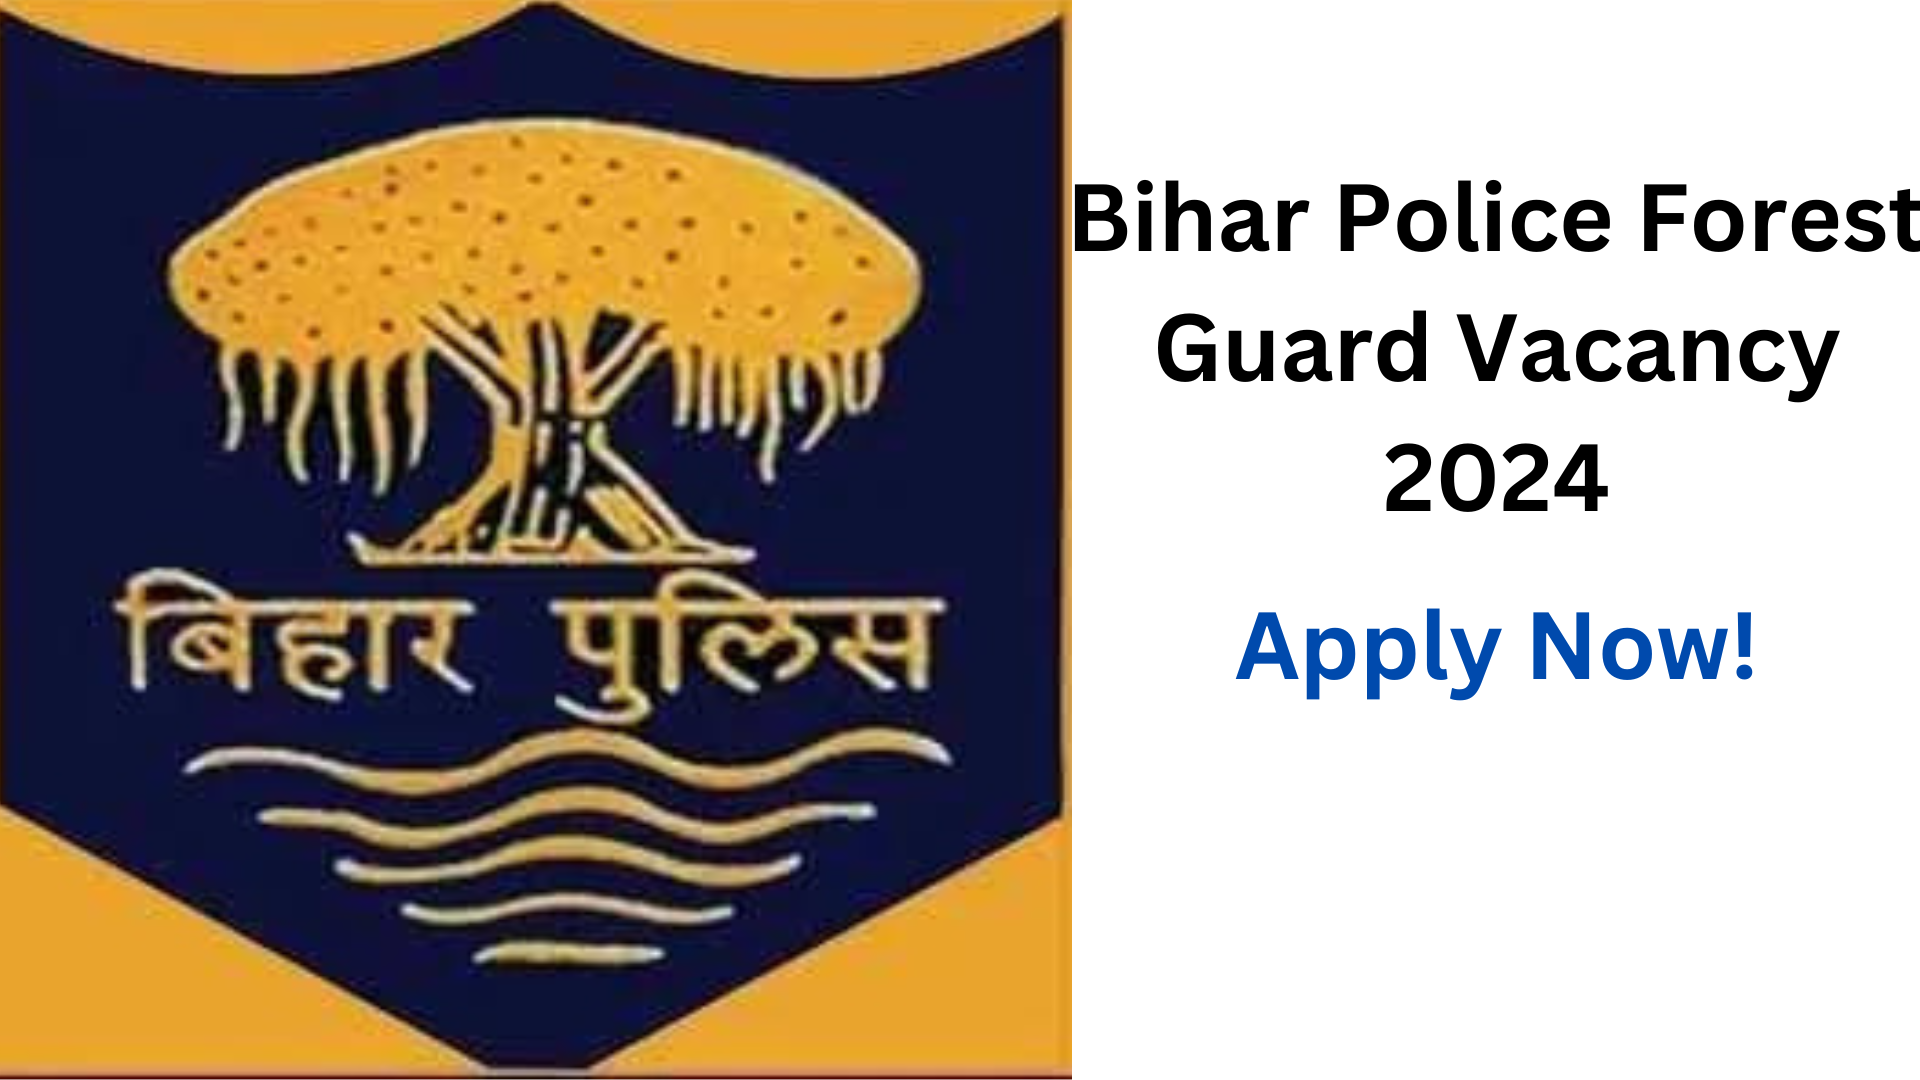 Bihar Police Forest Guard Vacancy 2024, Apply Now, Salary Up To 69,100, Check Latest Vacancy, Eligibility Criteria and More